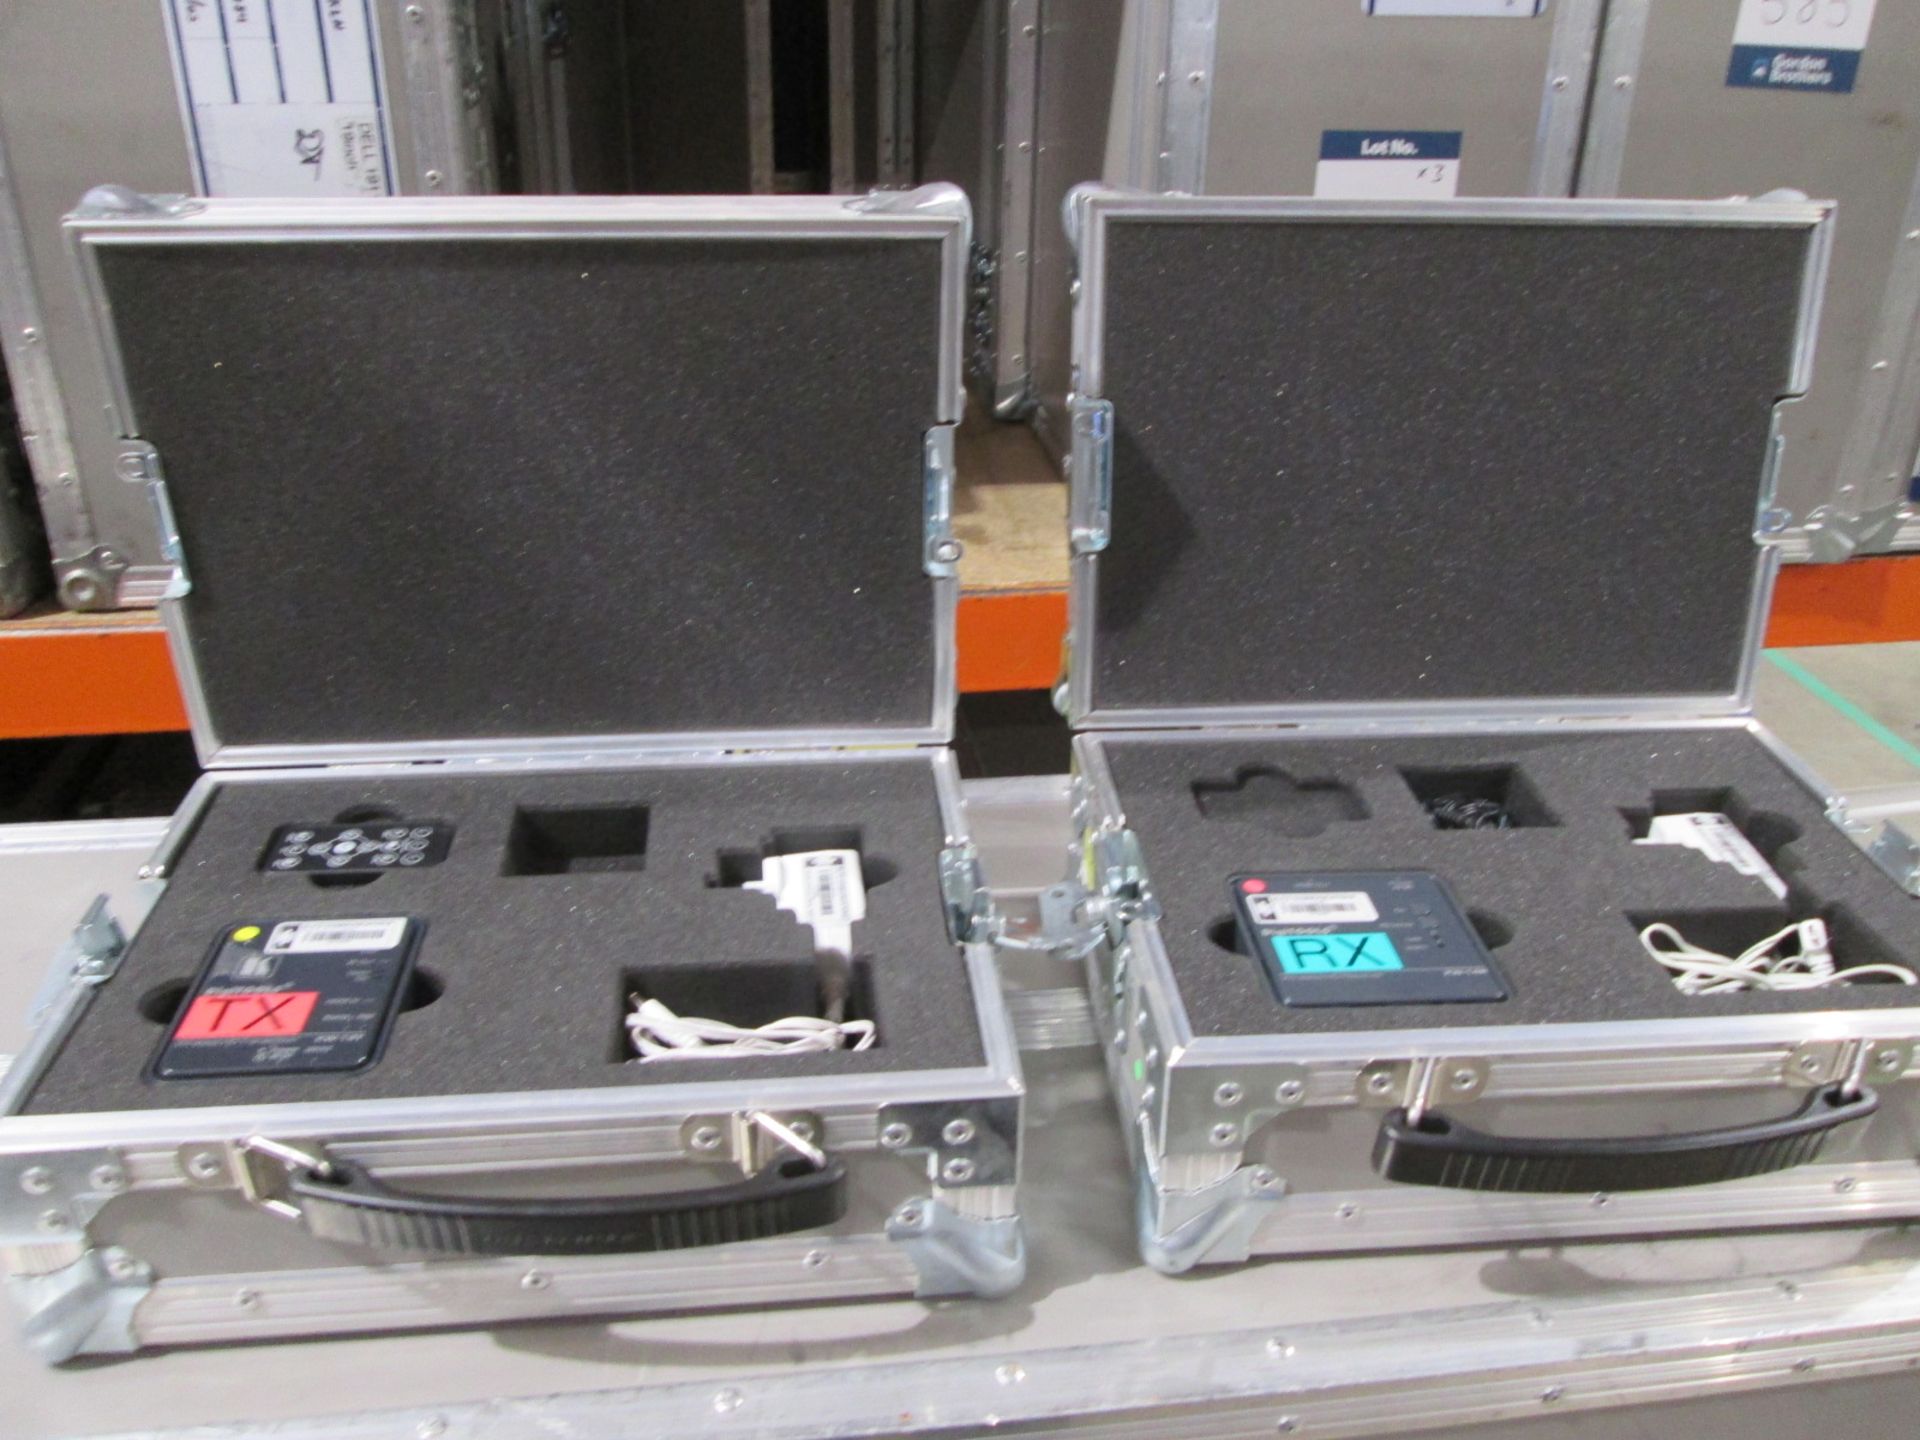 DigiTools KW-14 Wireless HDMI Transmitter and Receiver (Qty 1) In flight cases